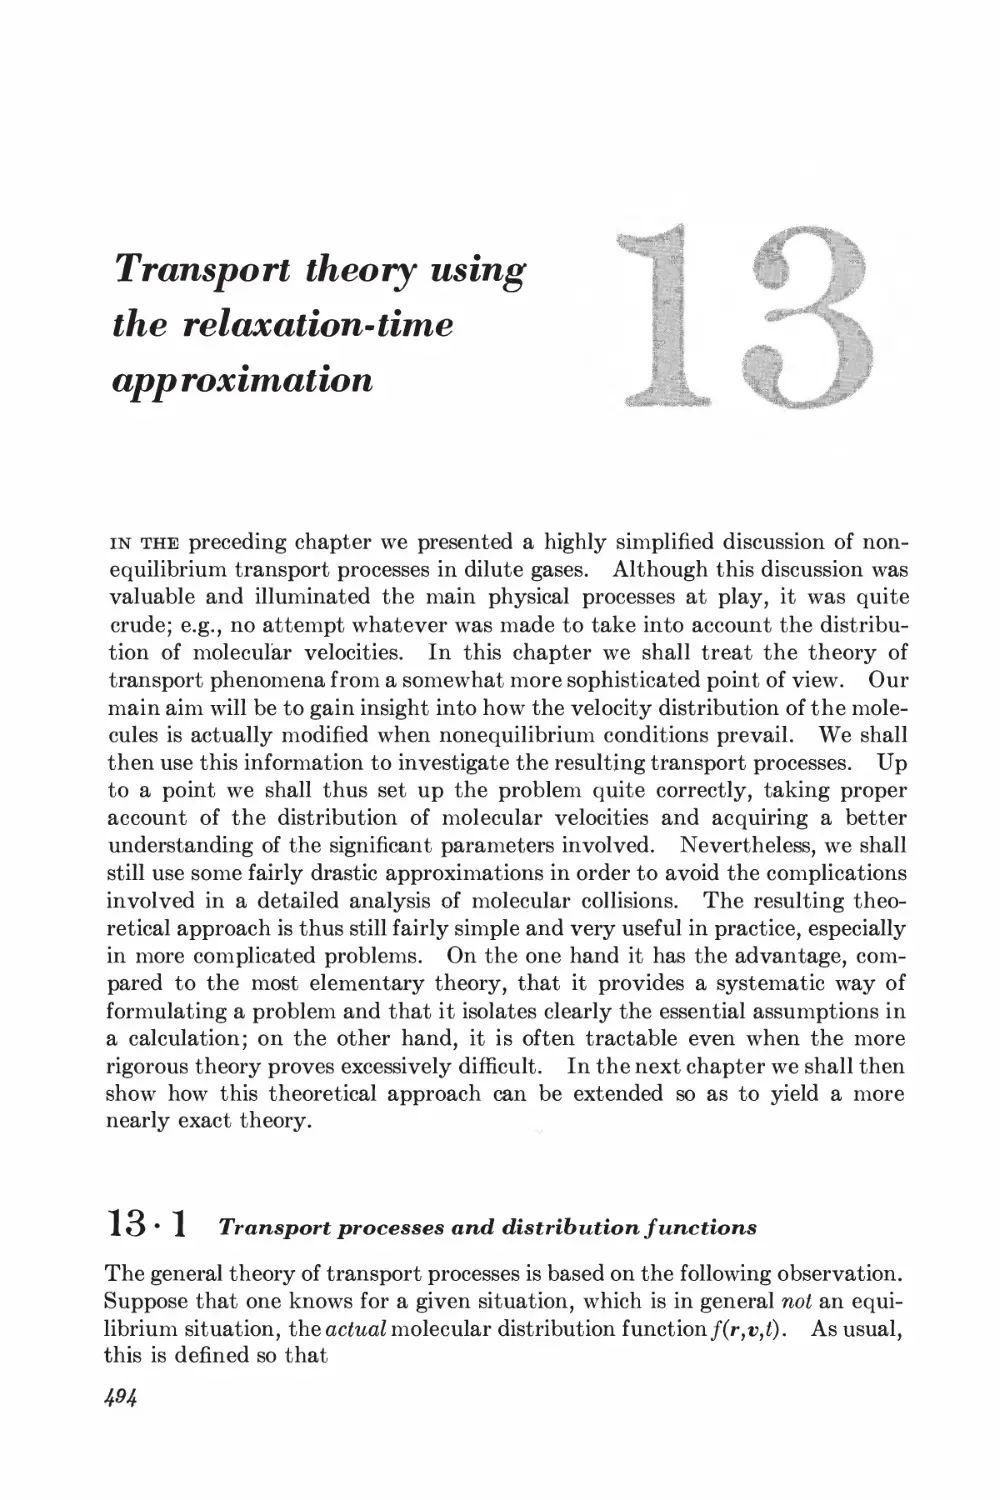 Chapter 13: Transport Theory Using the Relaxation-Time Approximation